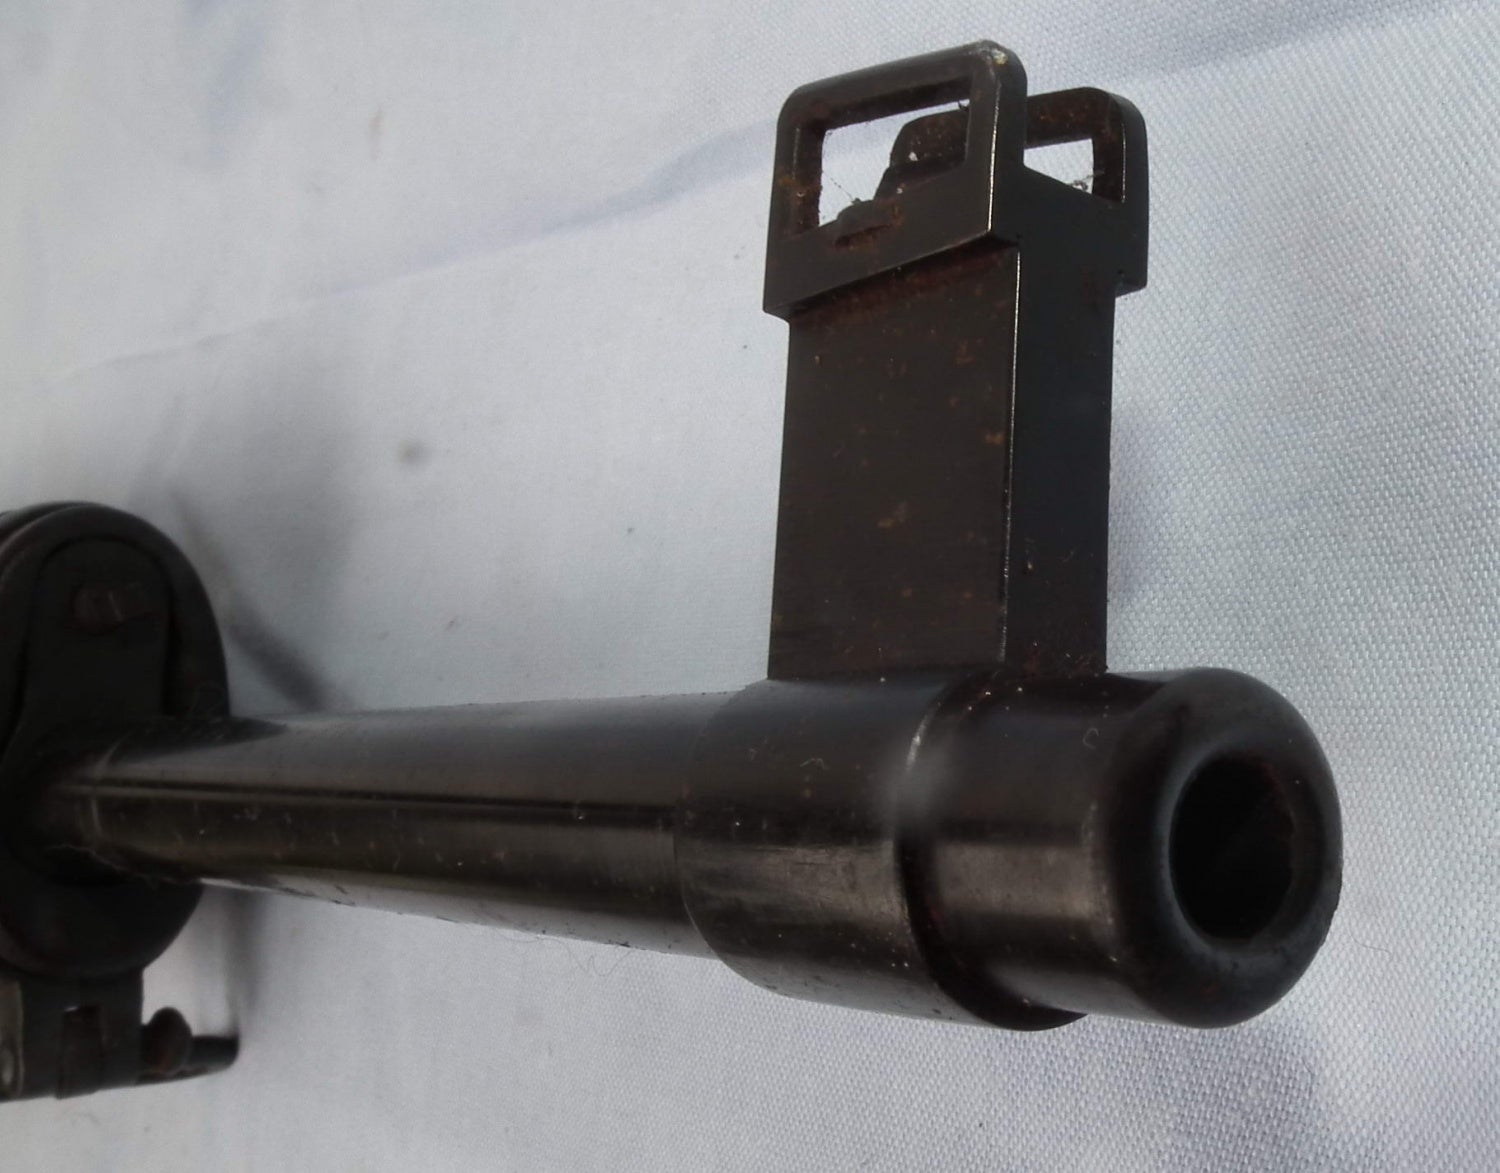 The rare prototype’s side-protected front sight differs from the original Gewehr 43 unit, which was frequently hooded.